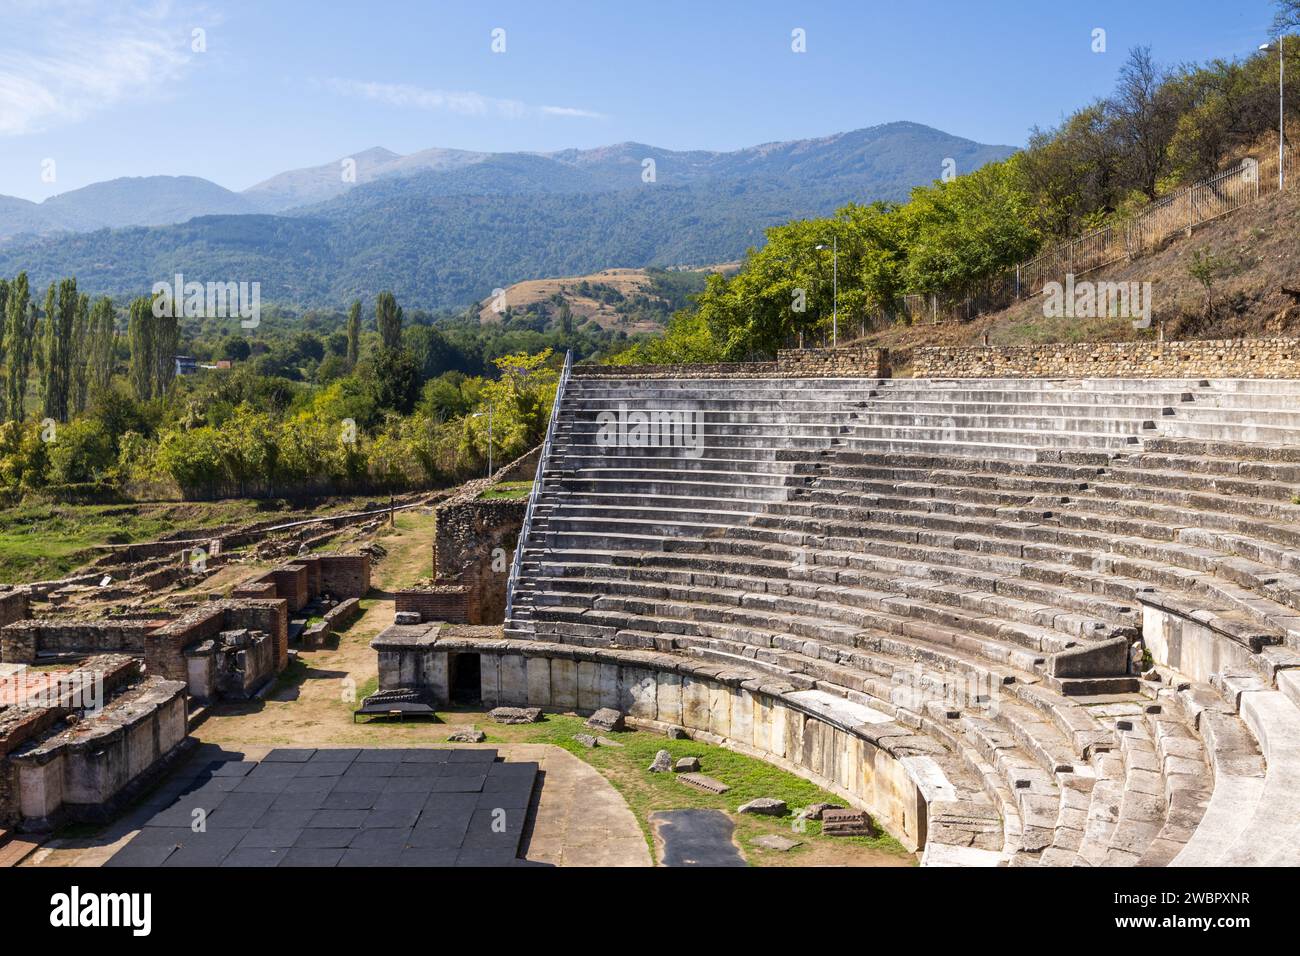 The amphitheatre at Heraclea Lyncestis, an ancient Greek city in Macedon near the modern-day city of Bitola in North Macedonia. Taken on a sunny day. Stock Photo